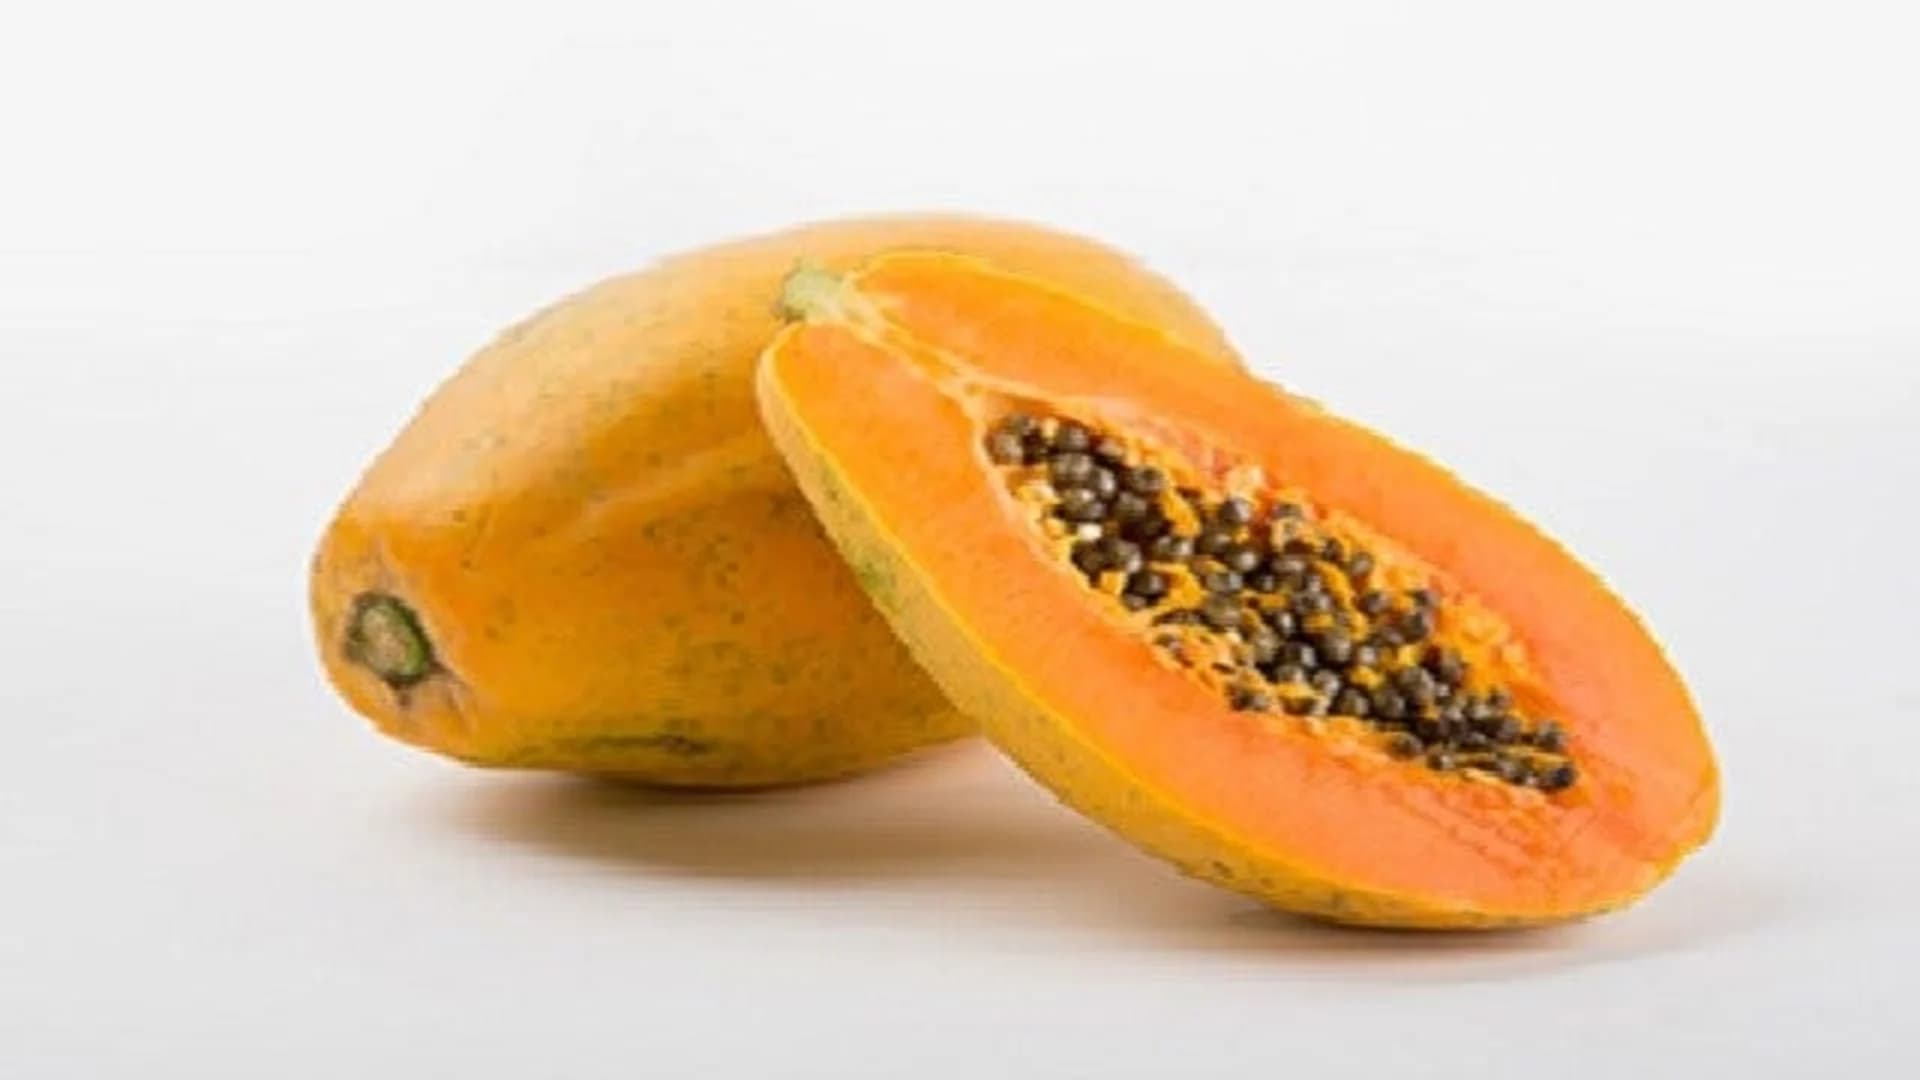 109 US salmonella cases now linked to papayas from Mexico